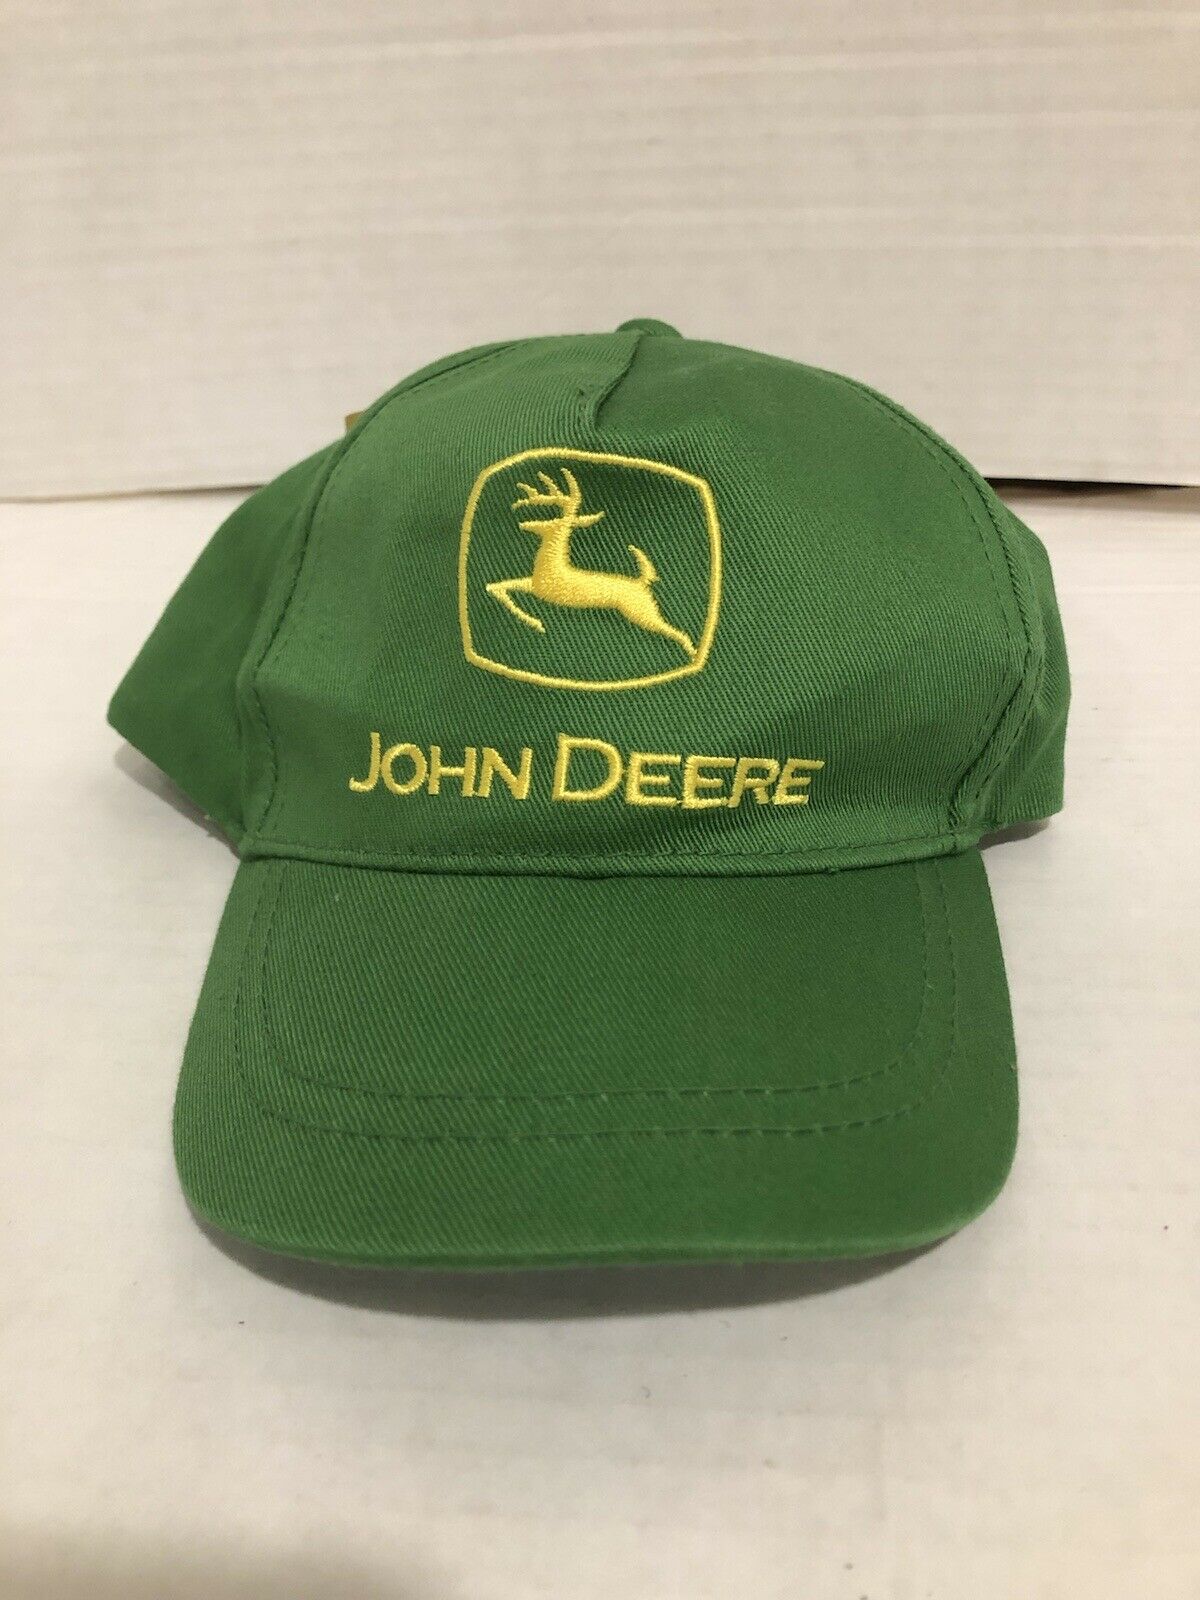 Childs New John Deere Hat With Tags